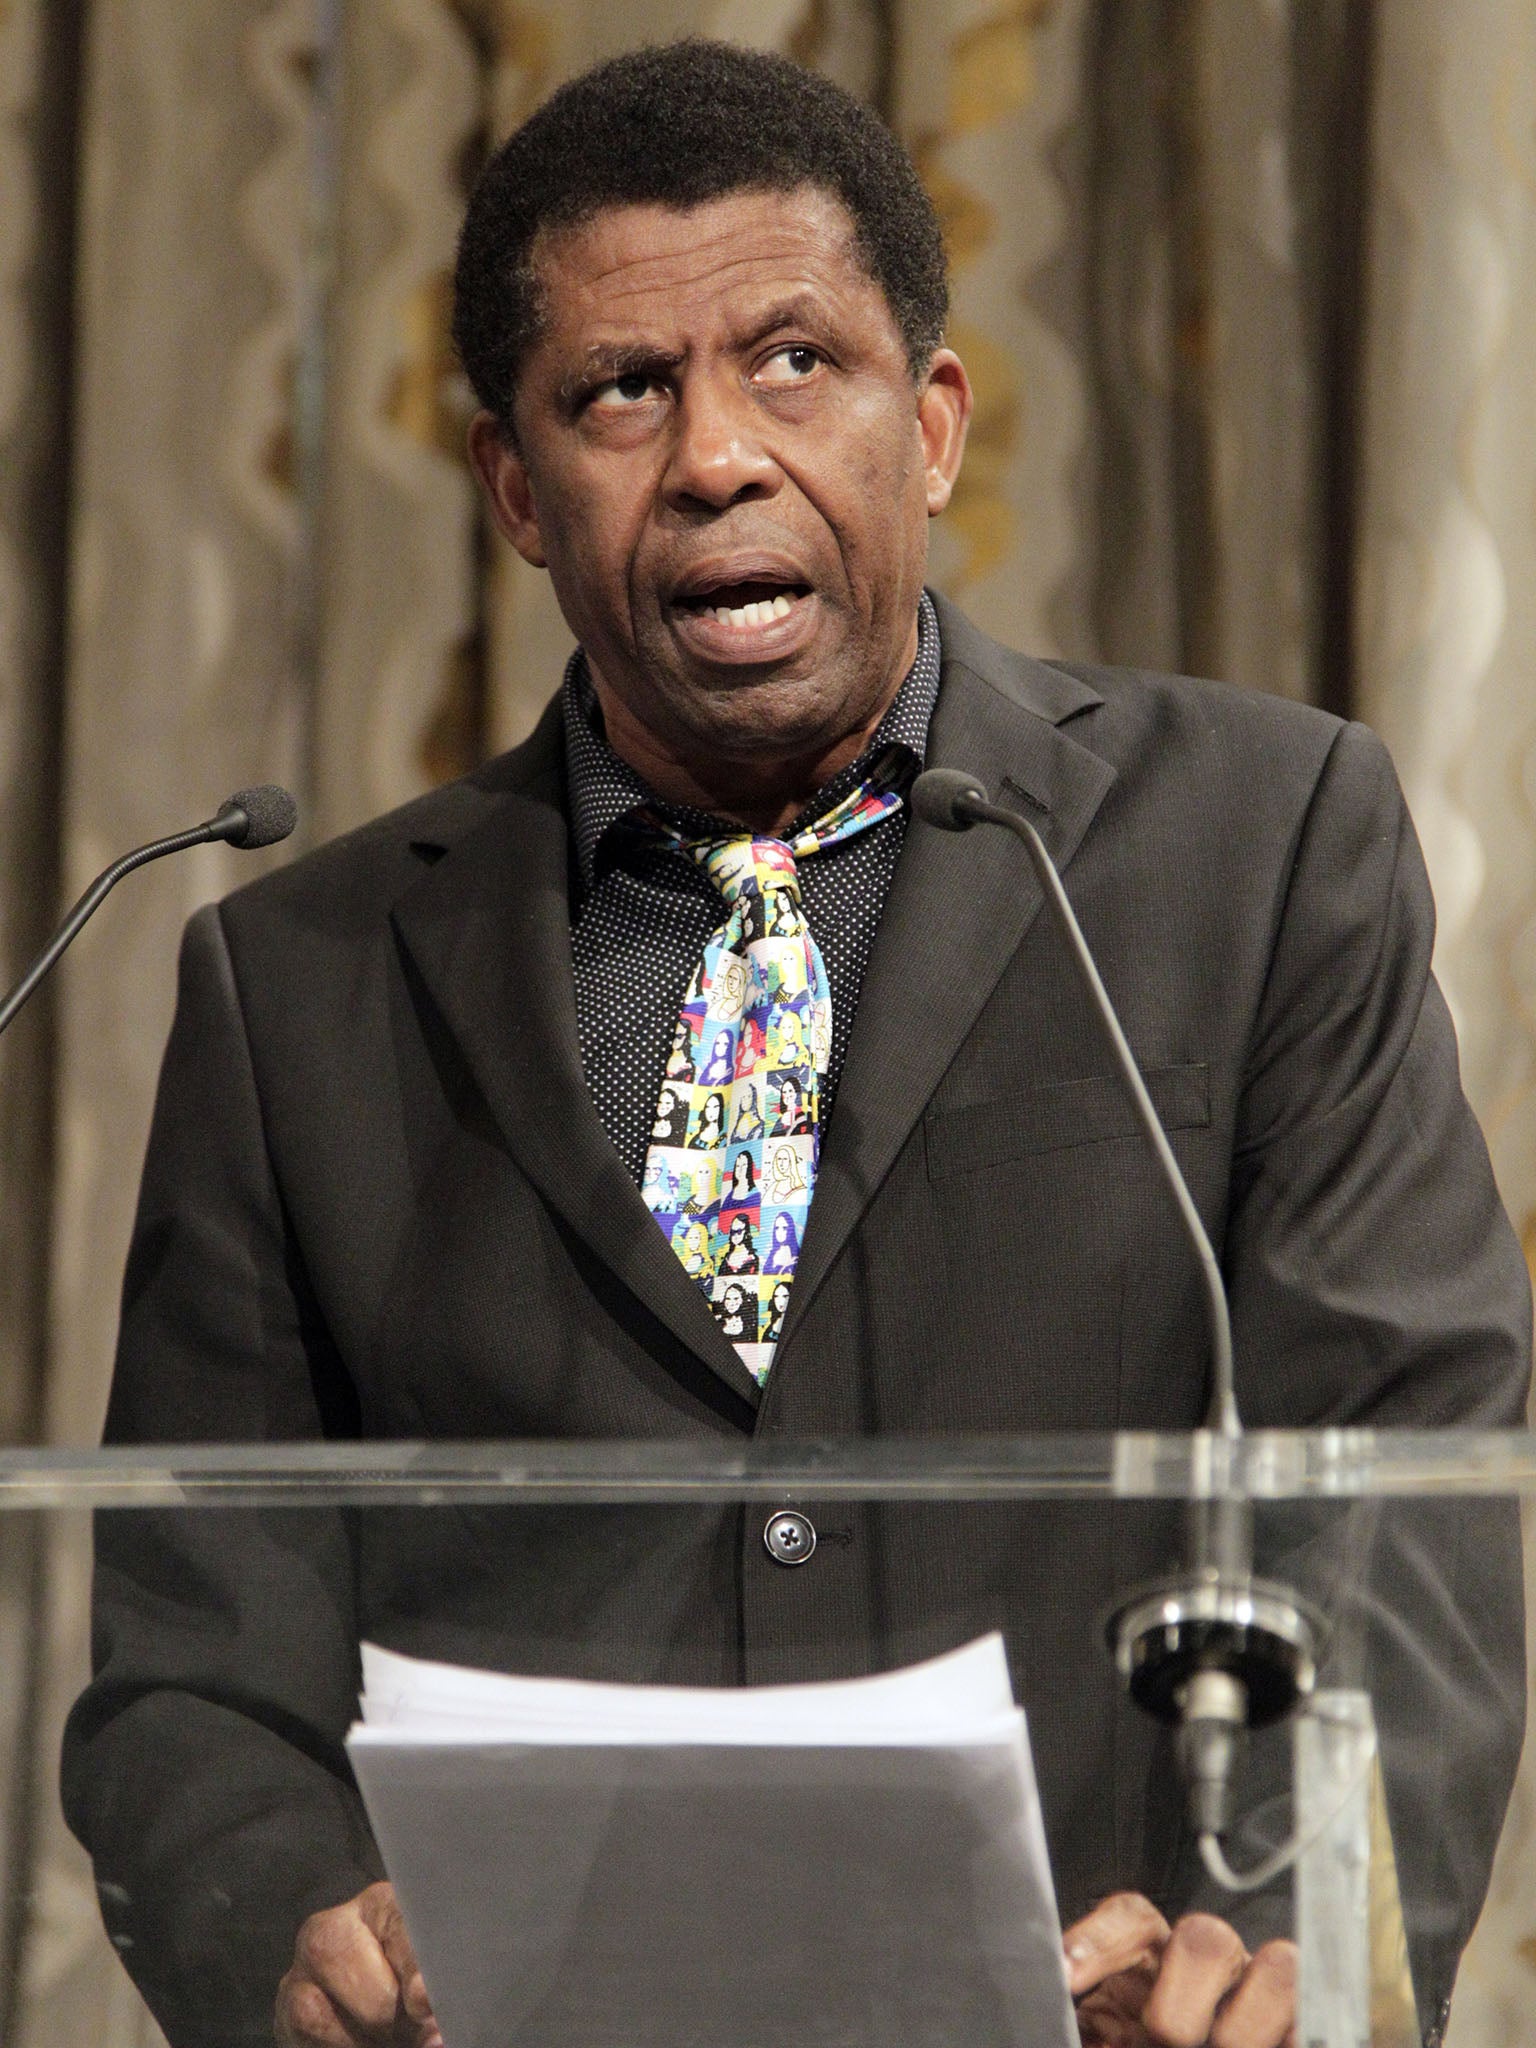 ‘We could fill all the seats tomorrow,’ says Dany Laferriere (AFP/Getty)